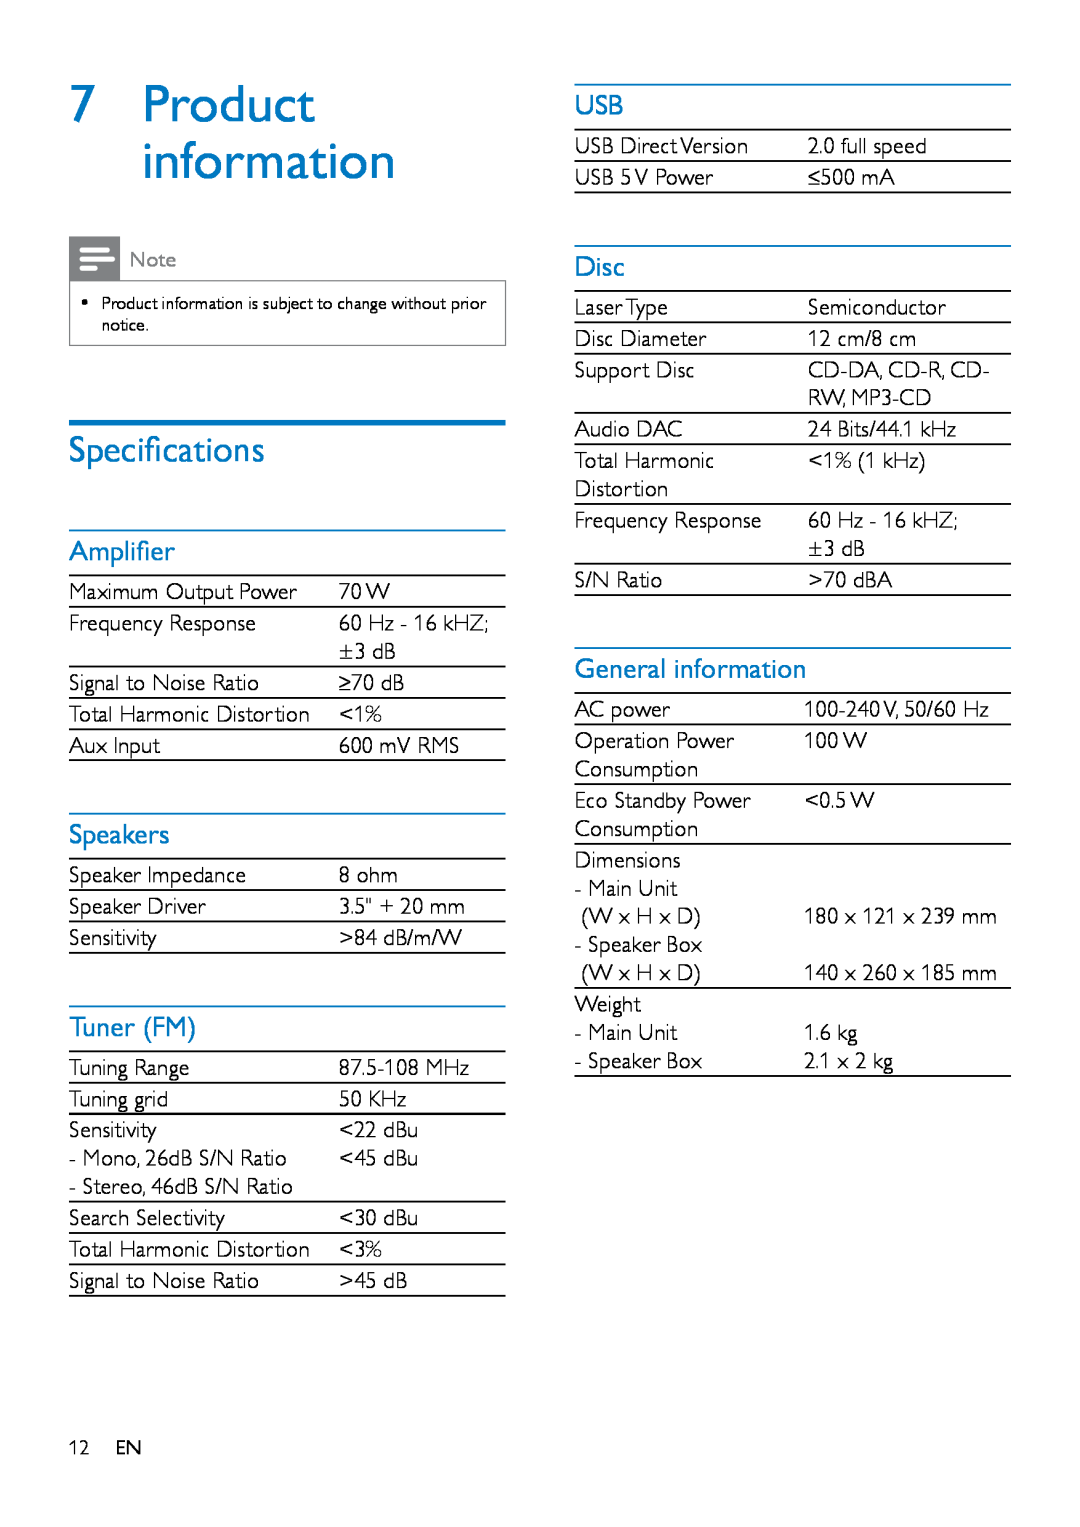 Philips MCM2150 user manual Product information, Specifications, Amplifier, Speakers, Tuner FM, Disc, General information 